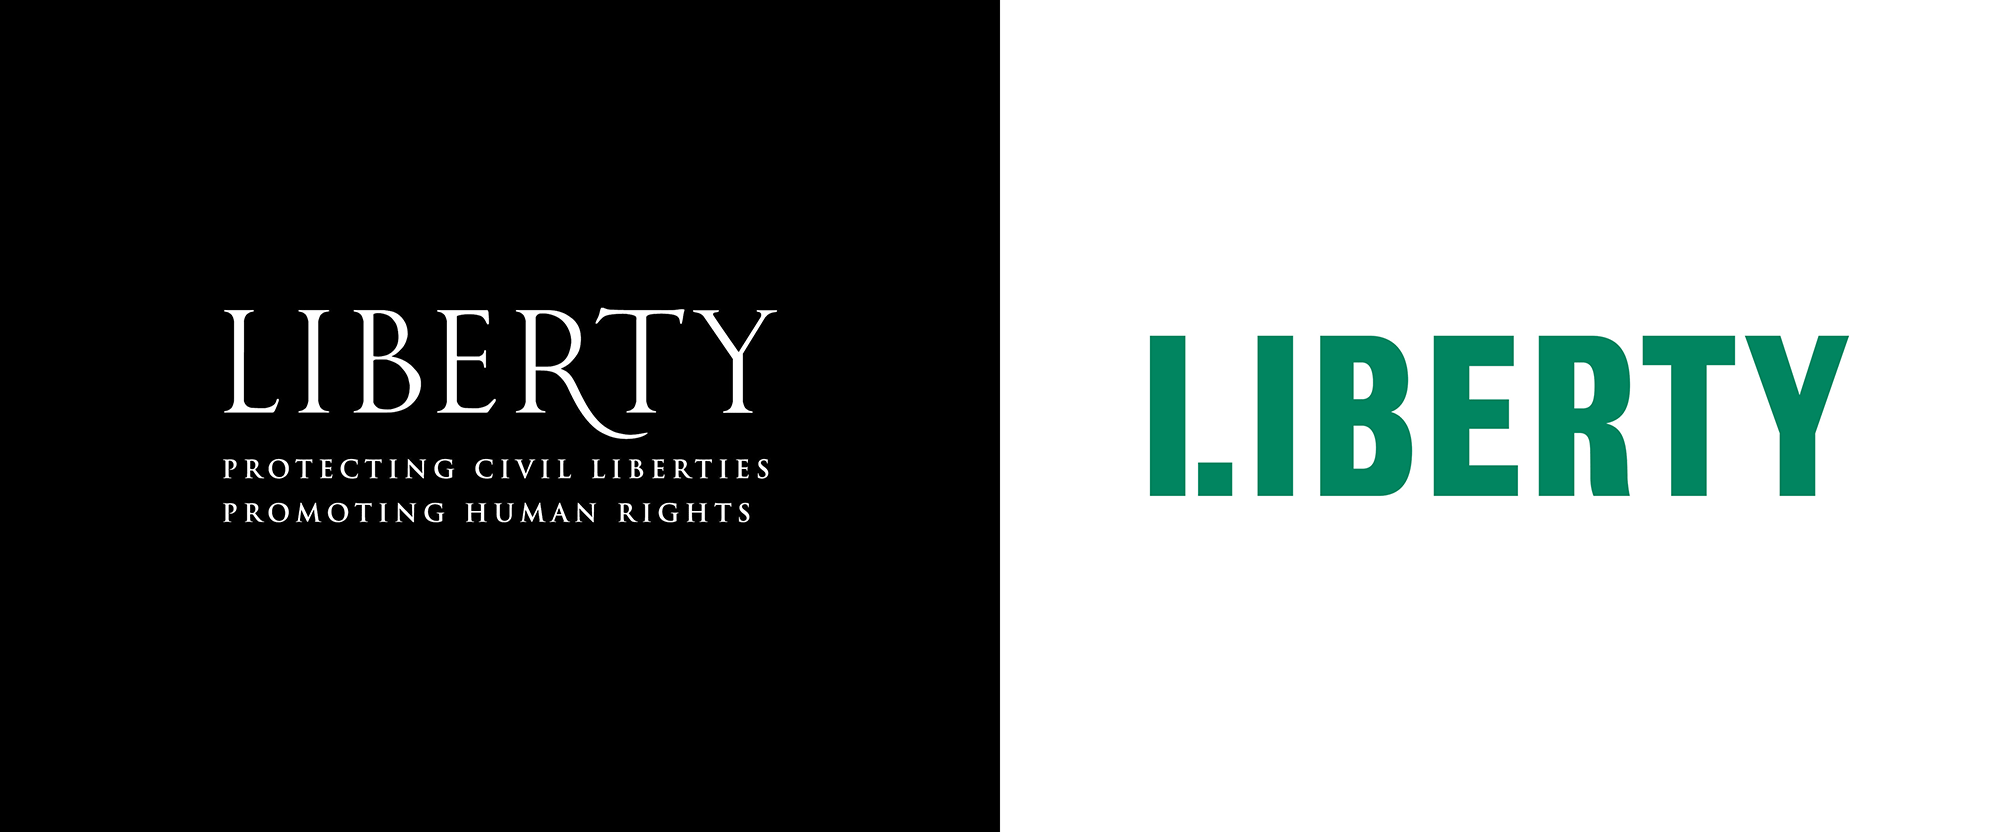 New Logo and Identity for Liberty by North